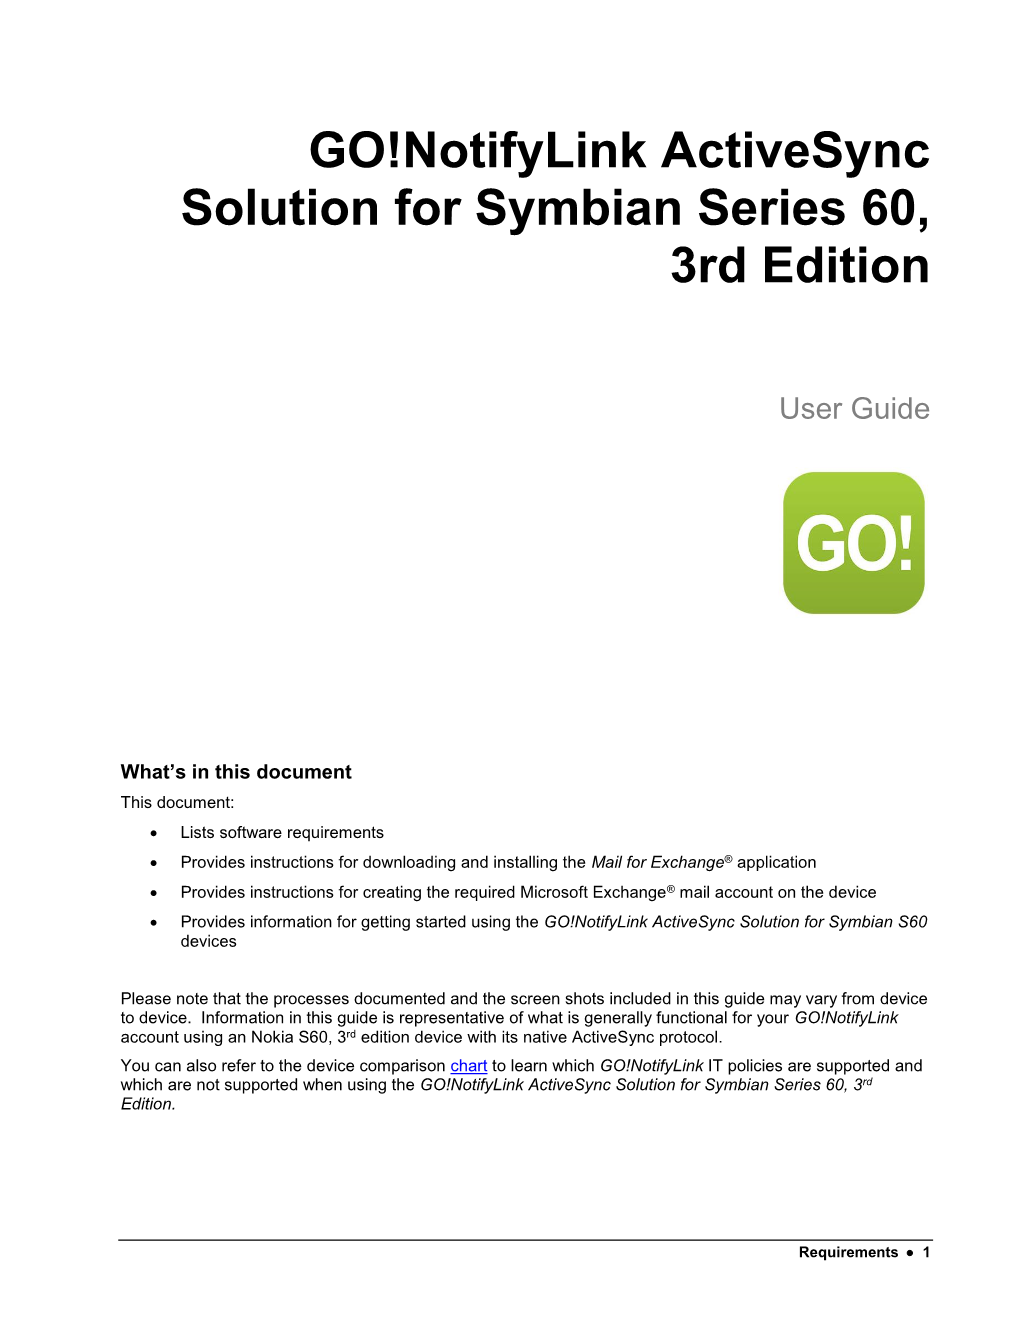 Symbian Solution User Guide